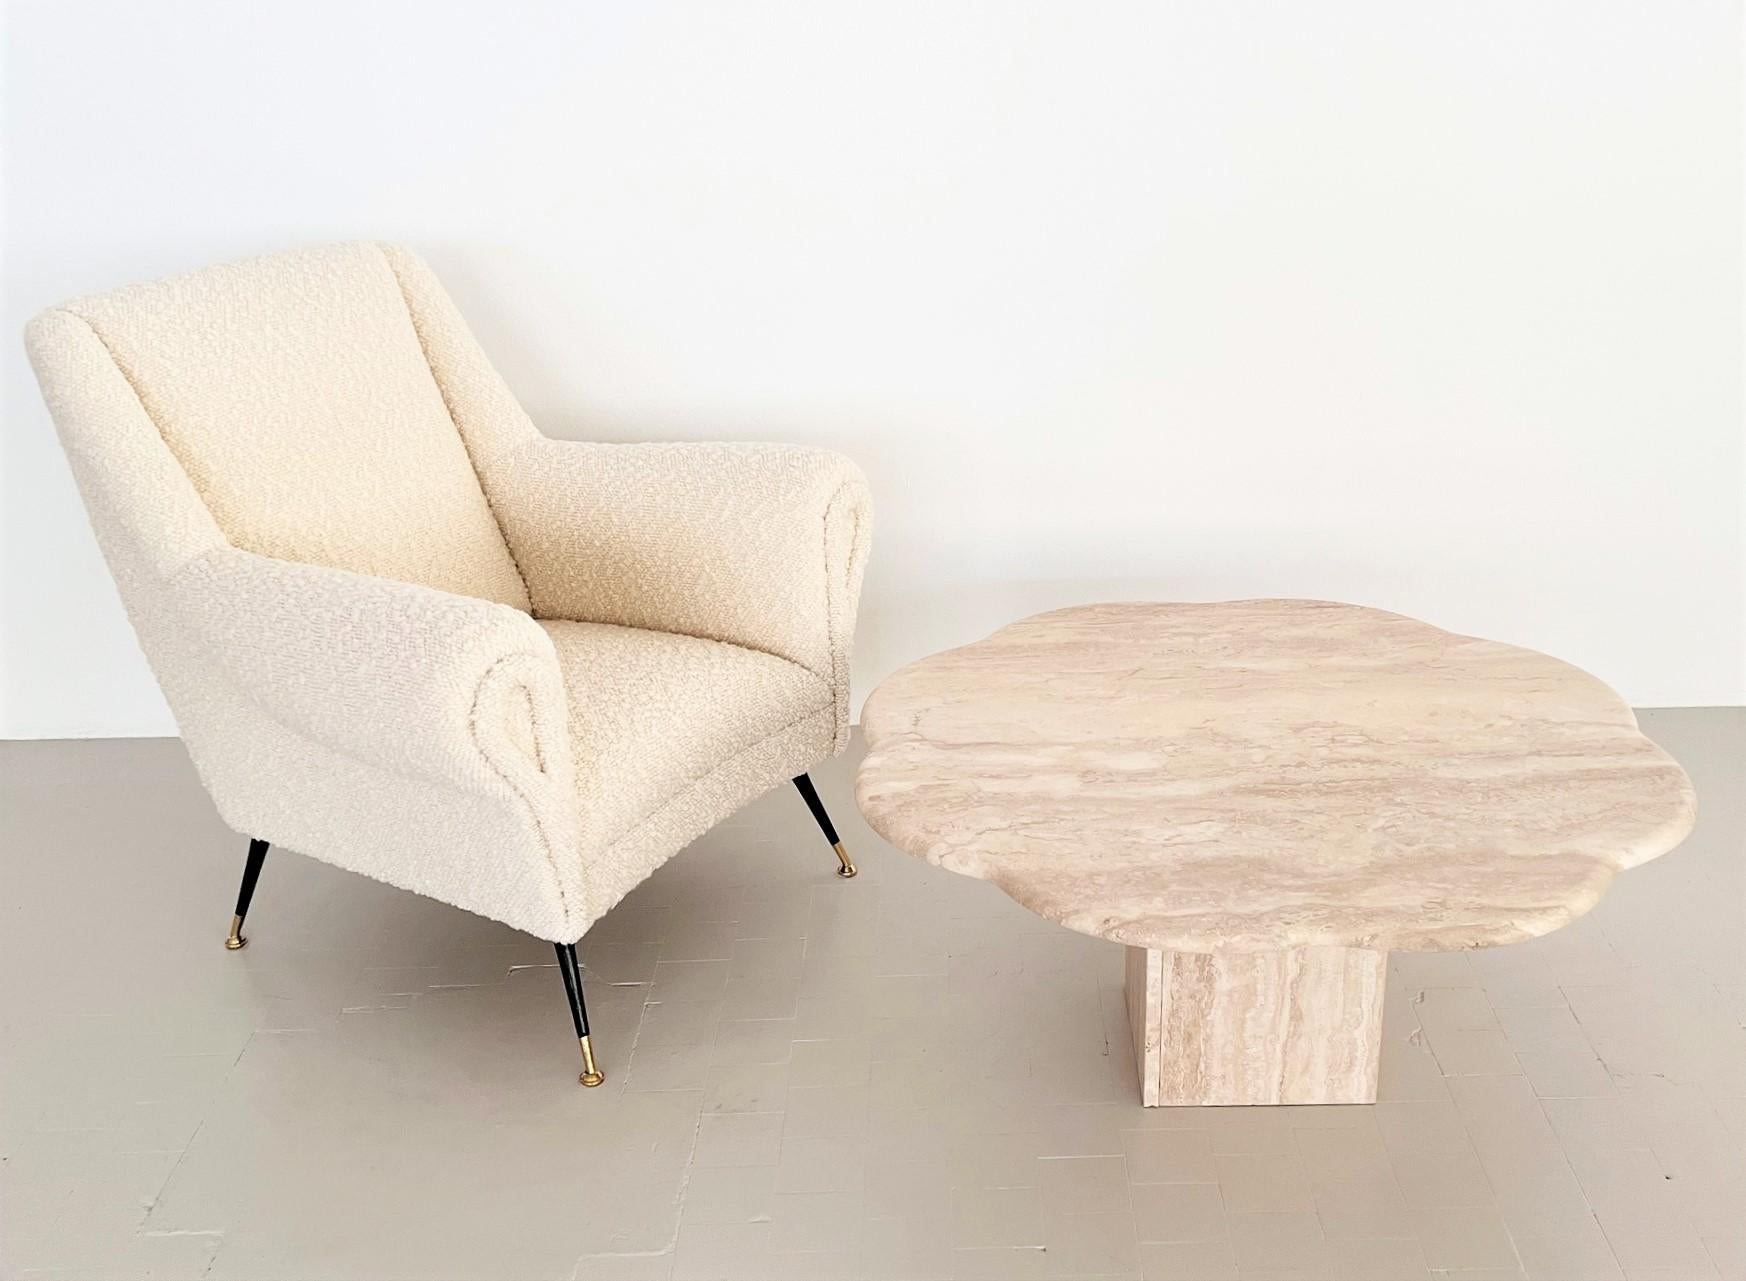 Sculptural sofa or coffee table handmade of Travertine stone in Italy in the 1970s.
The beautiful table top is cut with soft rounded edge and has a shape of a big flower.
The two table legs in triangular shape, also made of Travertine stone, are